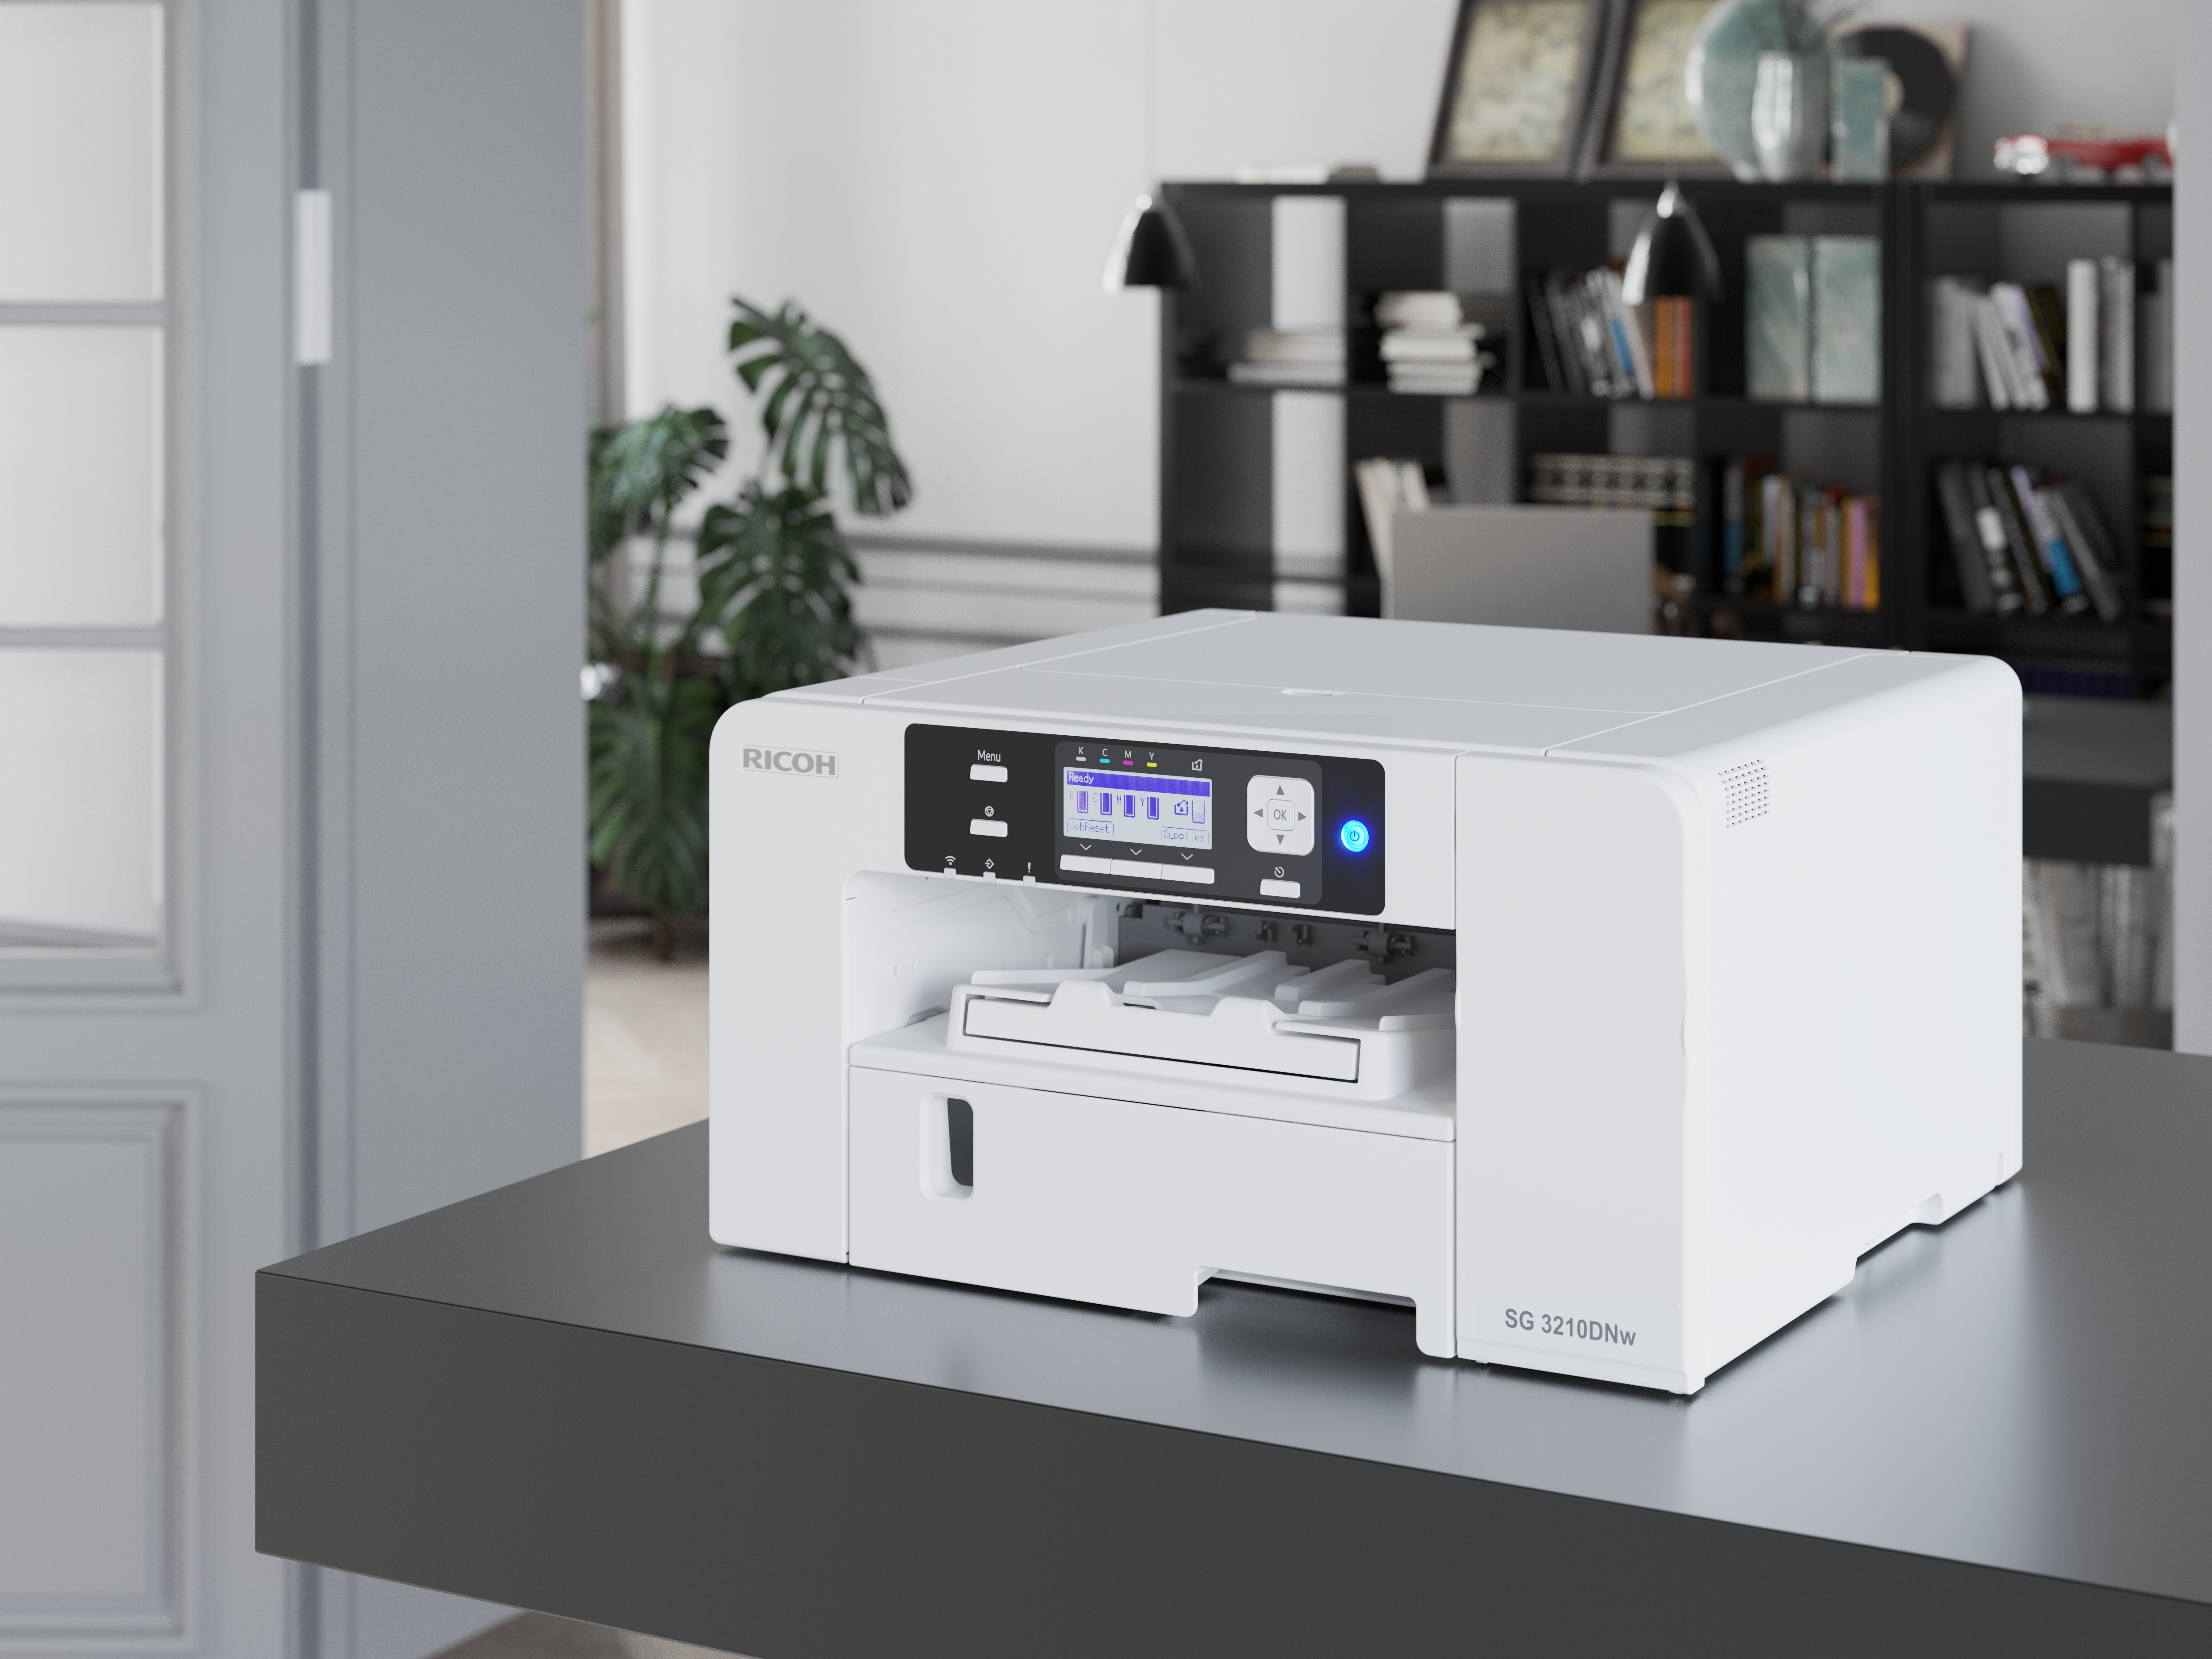 Ricoh launches GelJet device to support remote working